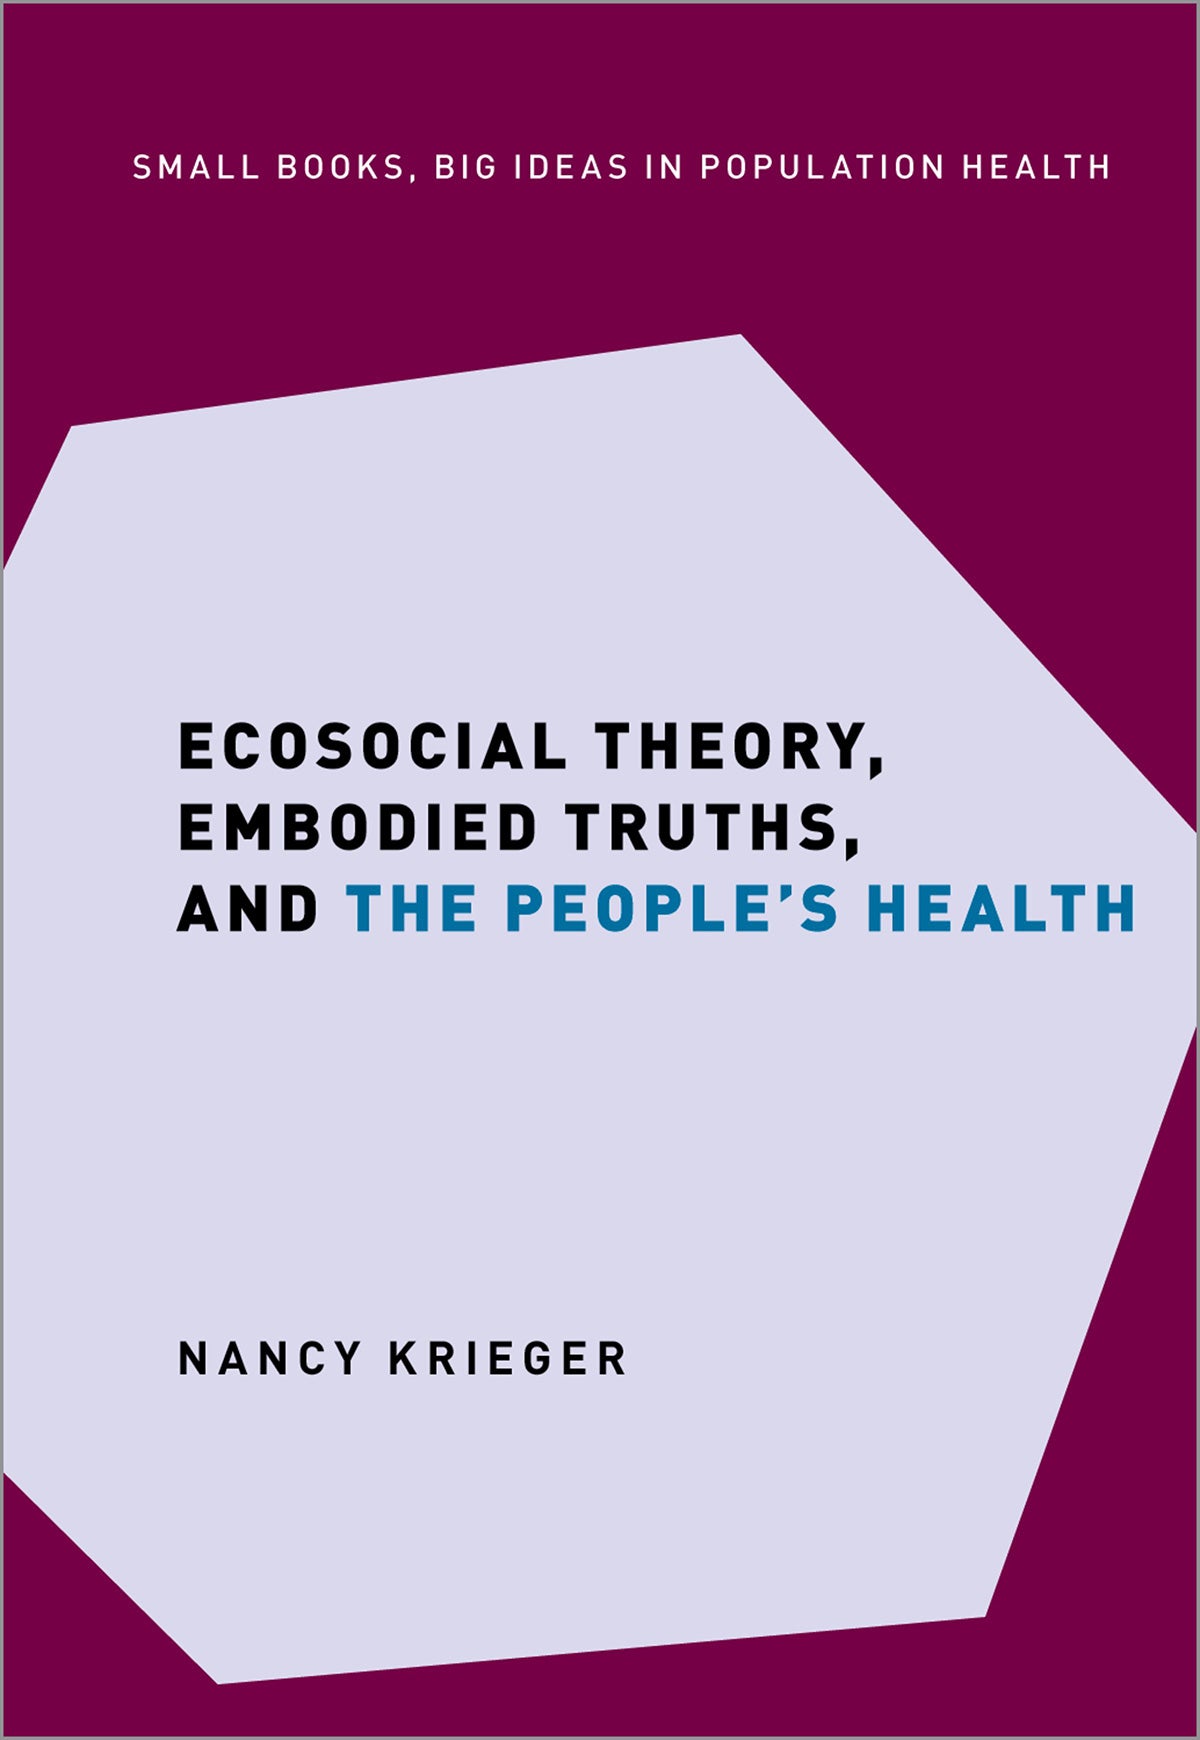 Book cover: Maroon background with white hexagon in center and title/author.